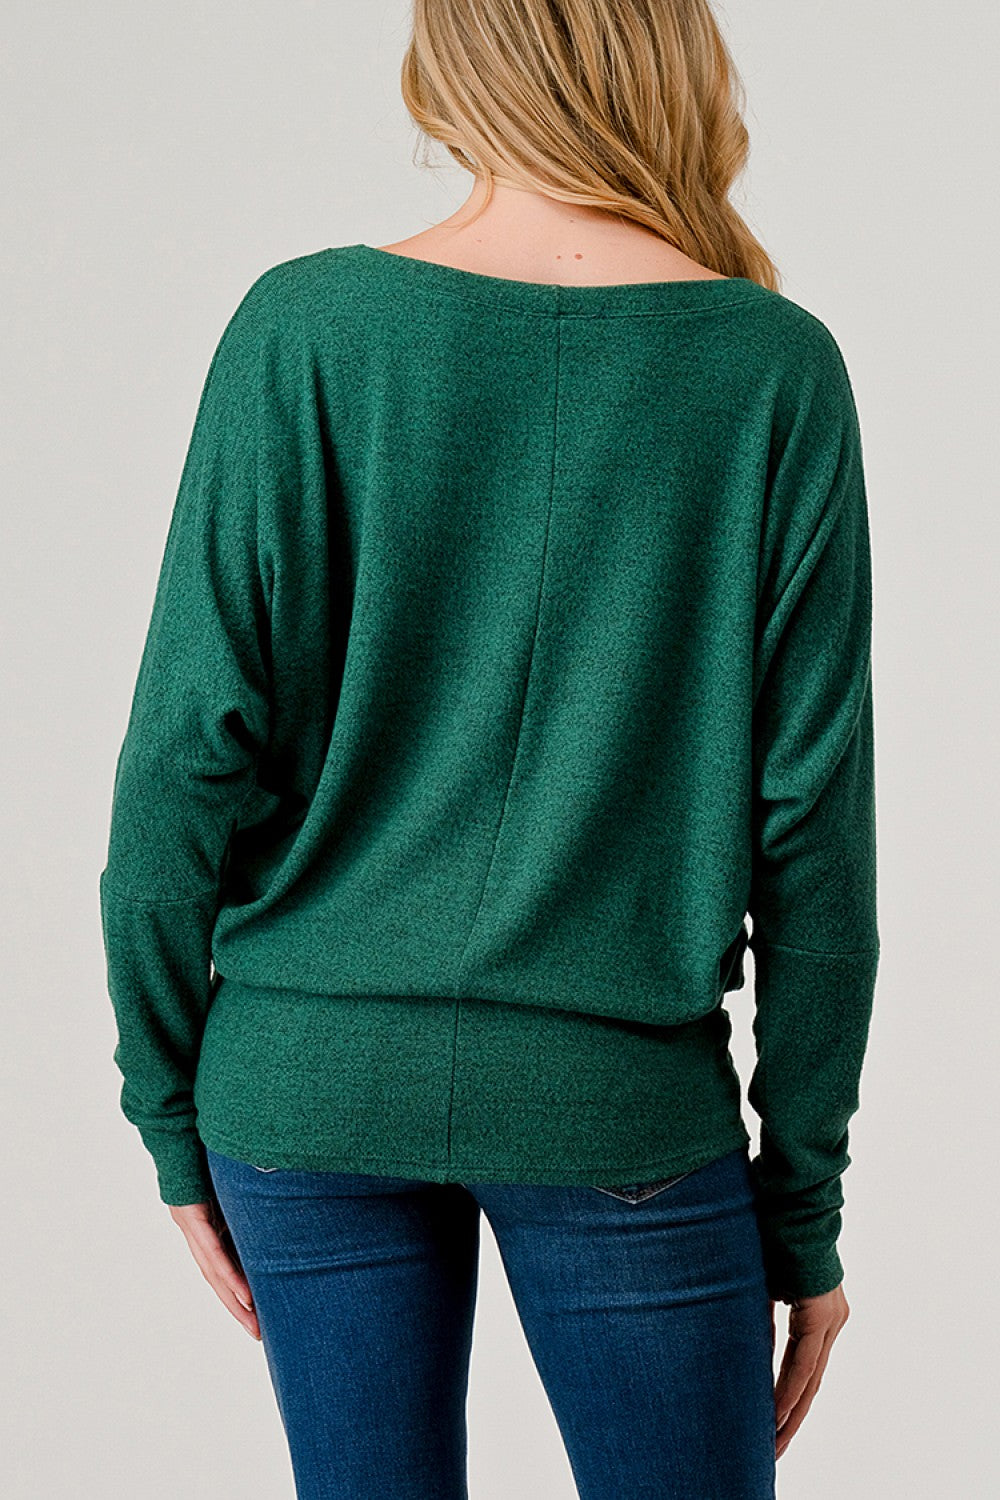 Natural Vibe Brushed Top (Evergreen)